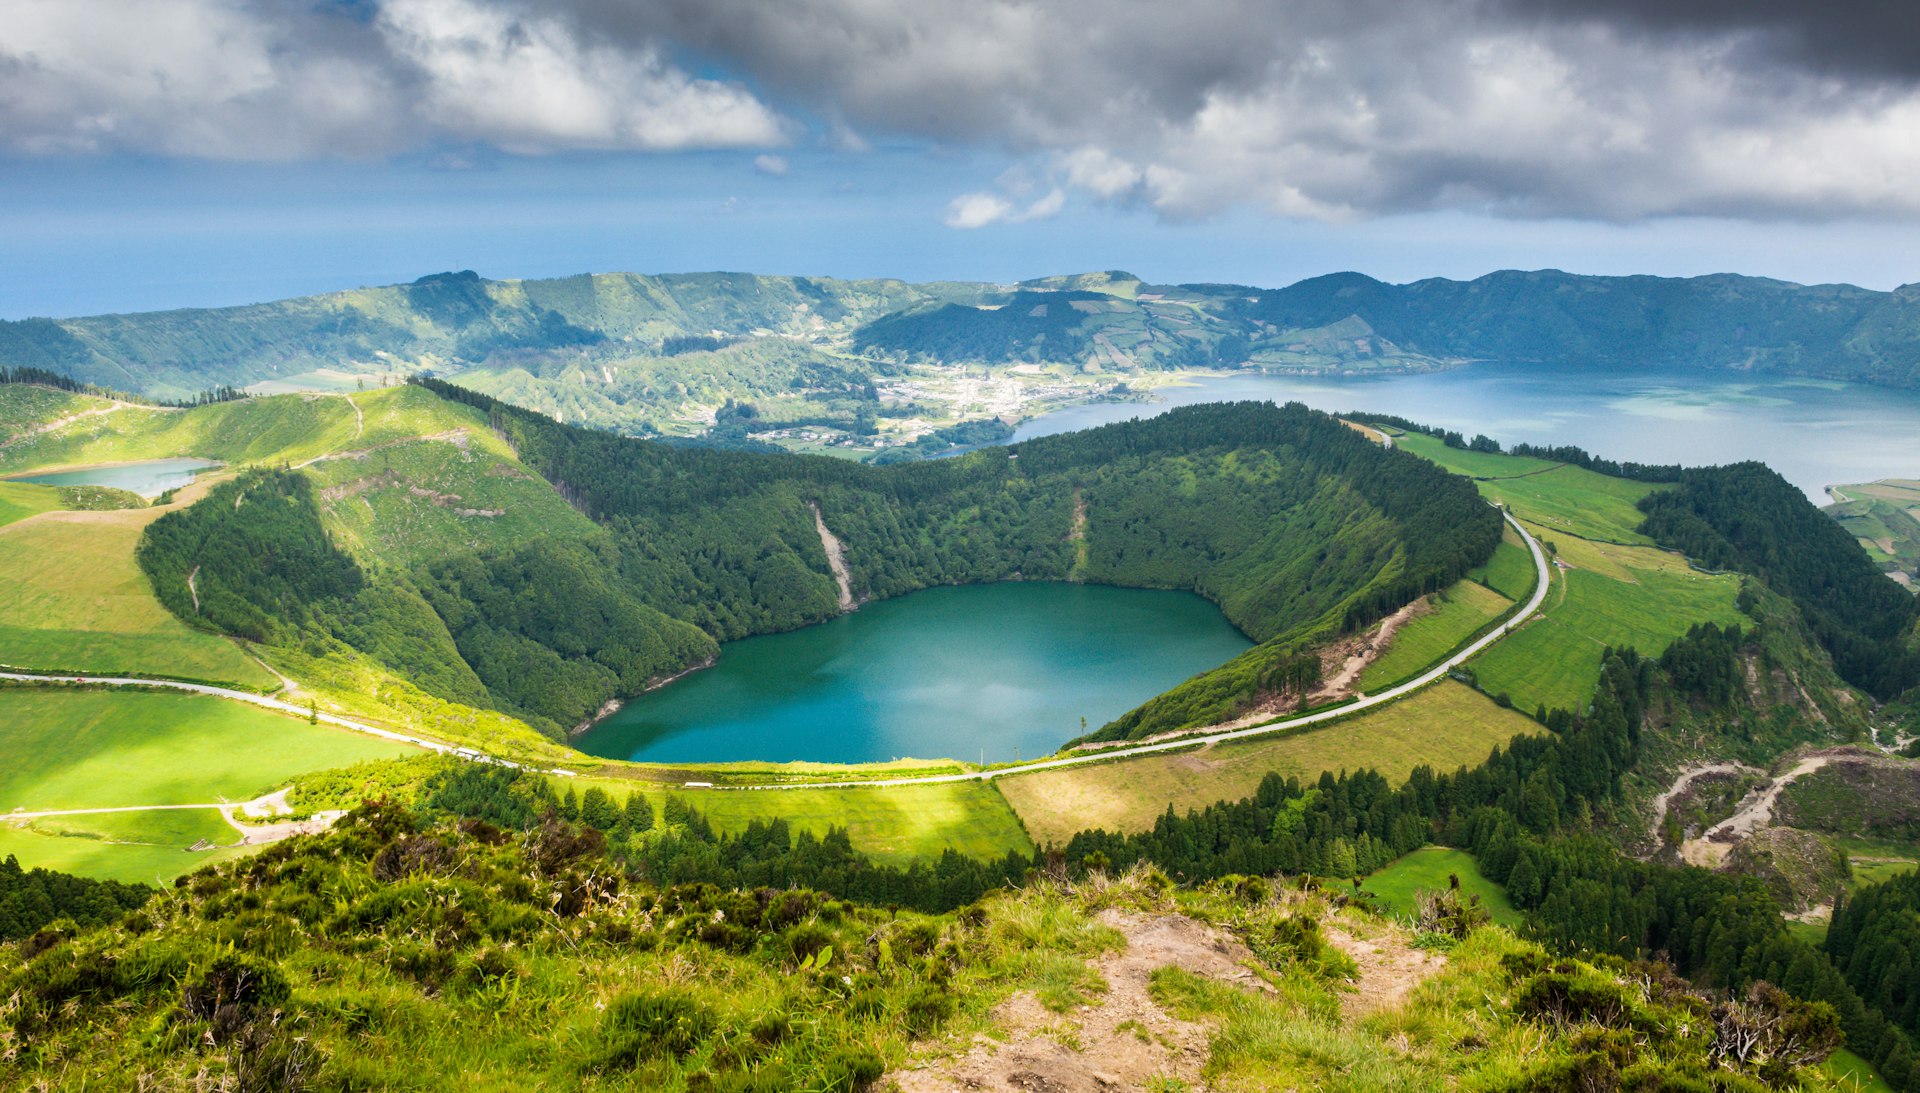 Volcanic crater lake of Sete Cidades, the Azores